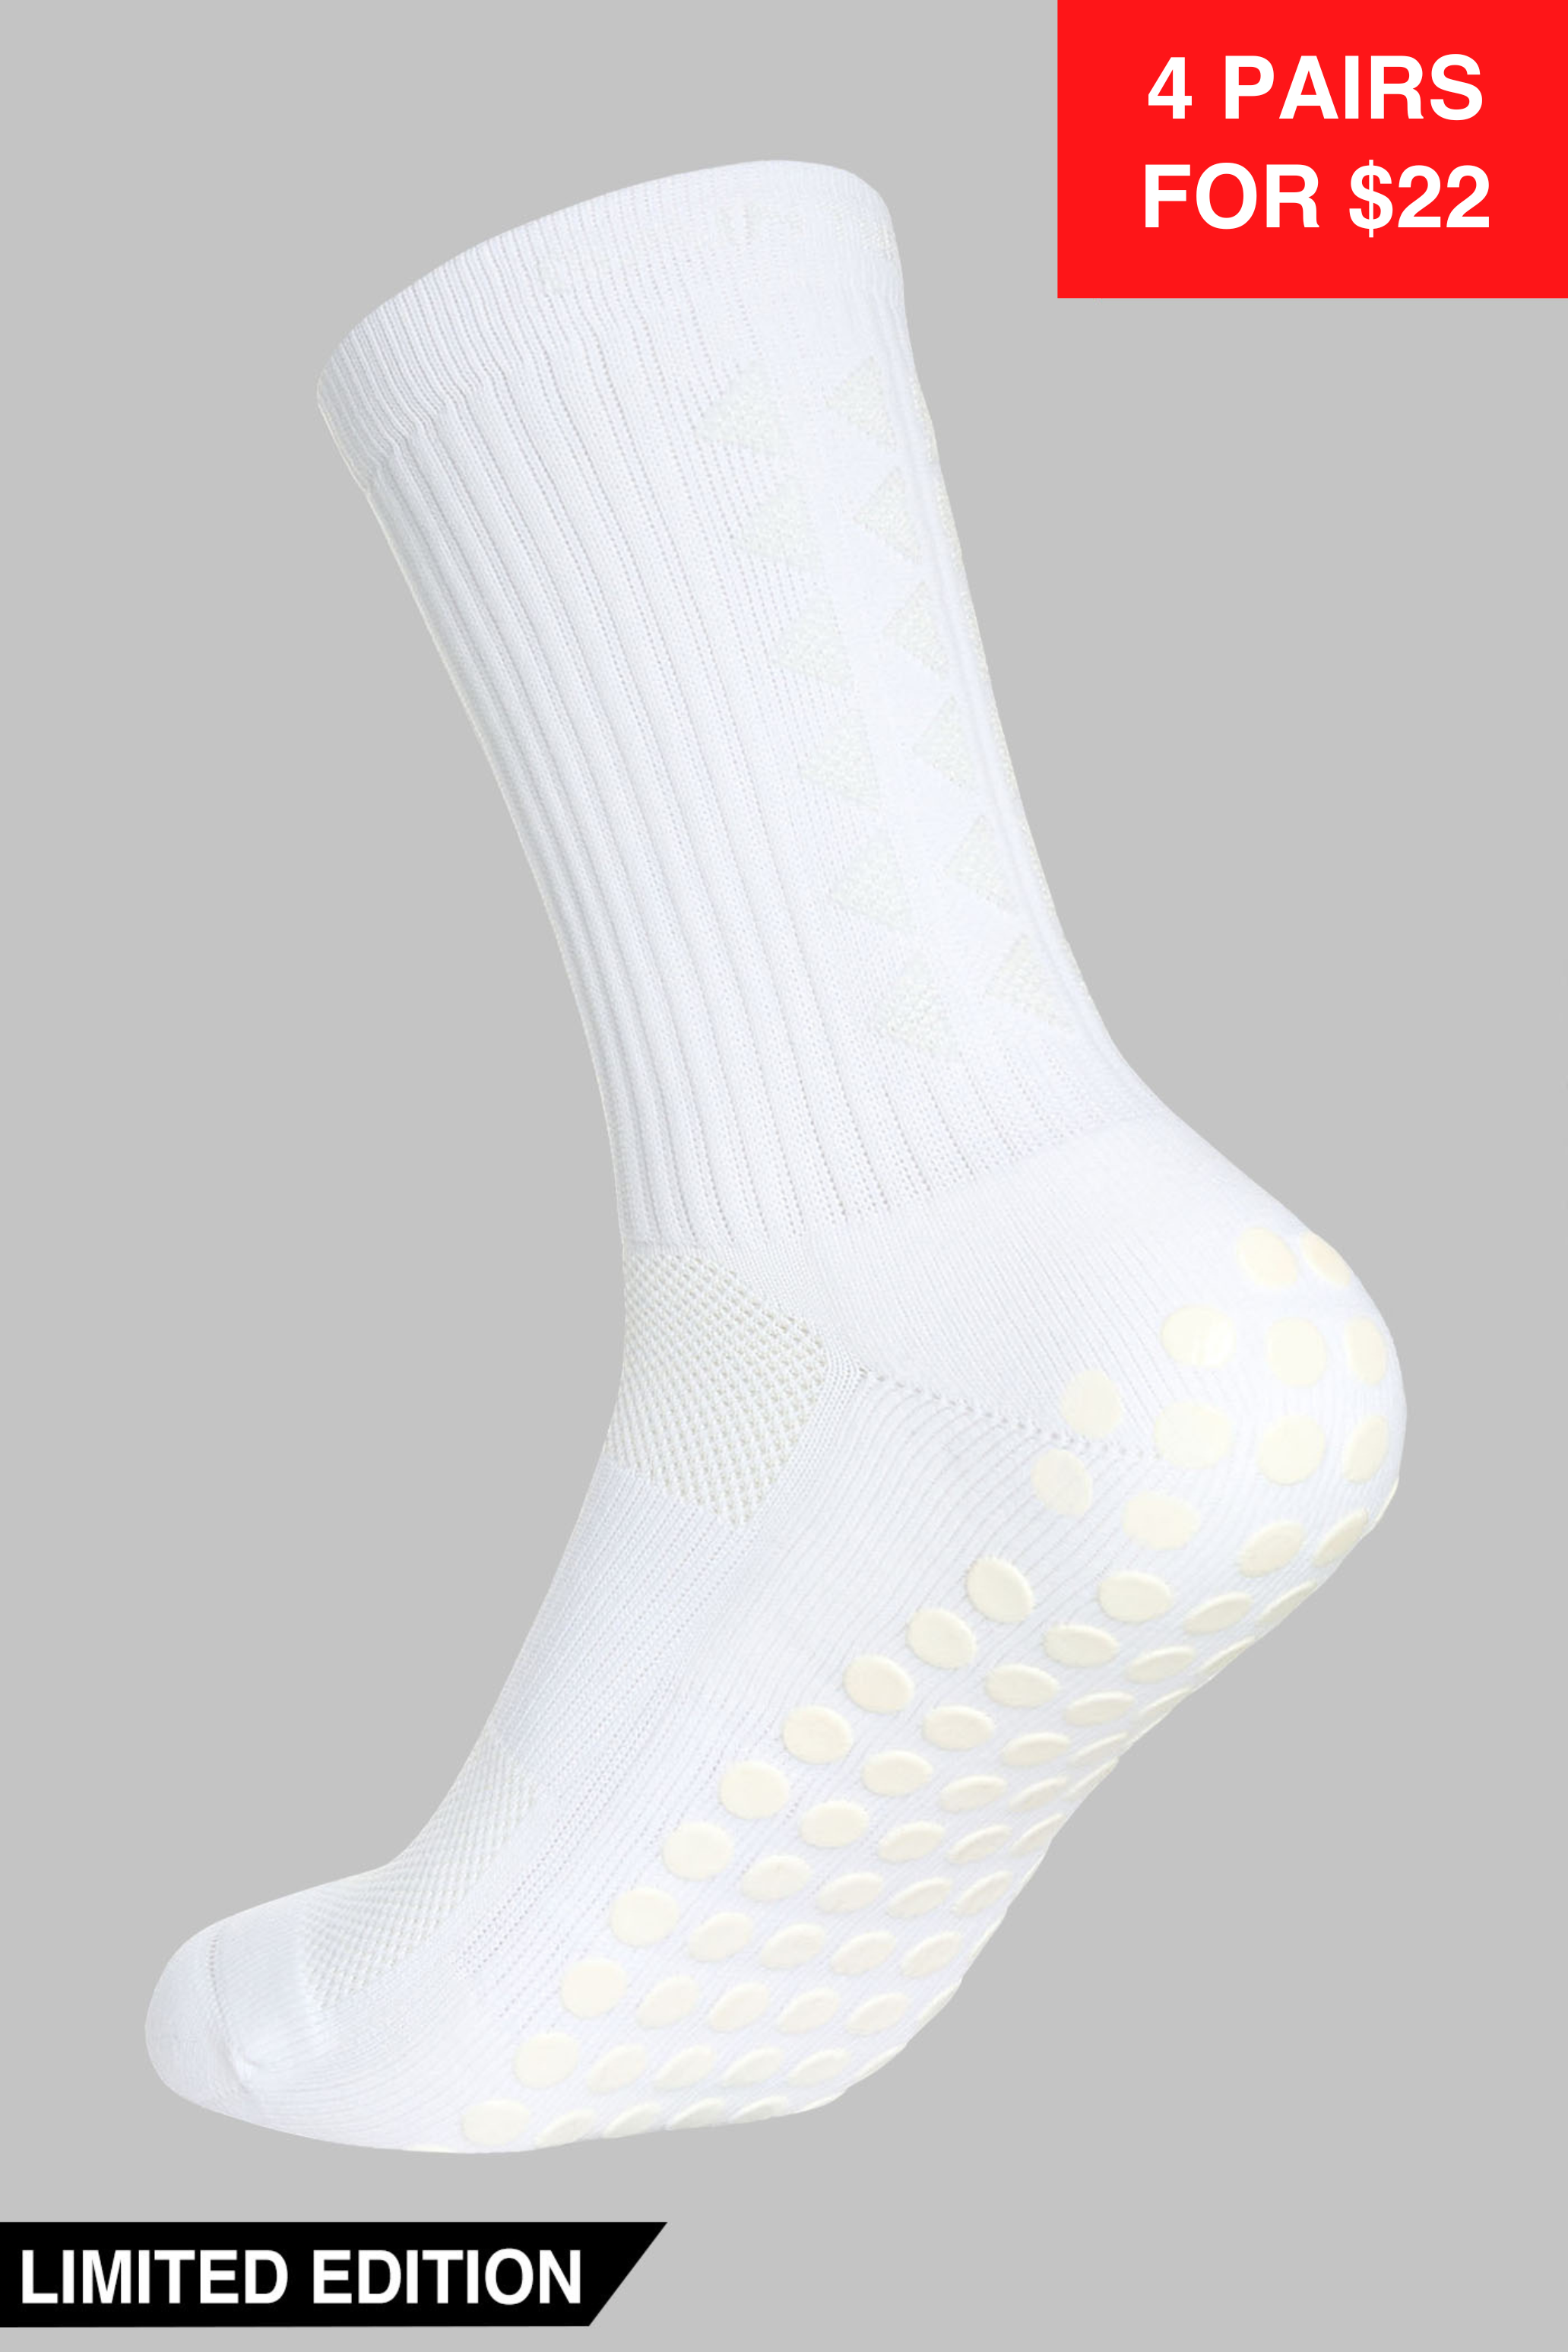 WHITEOUT EDITION GRIP SOCKS 2.0